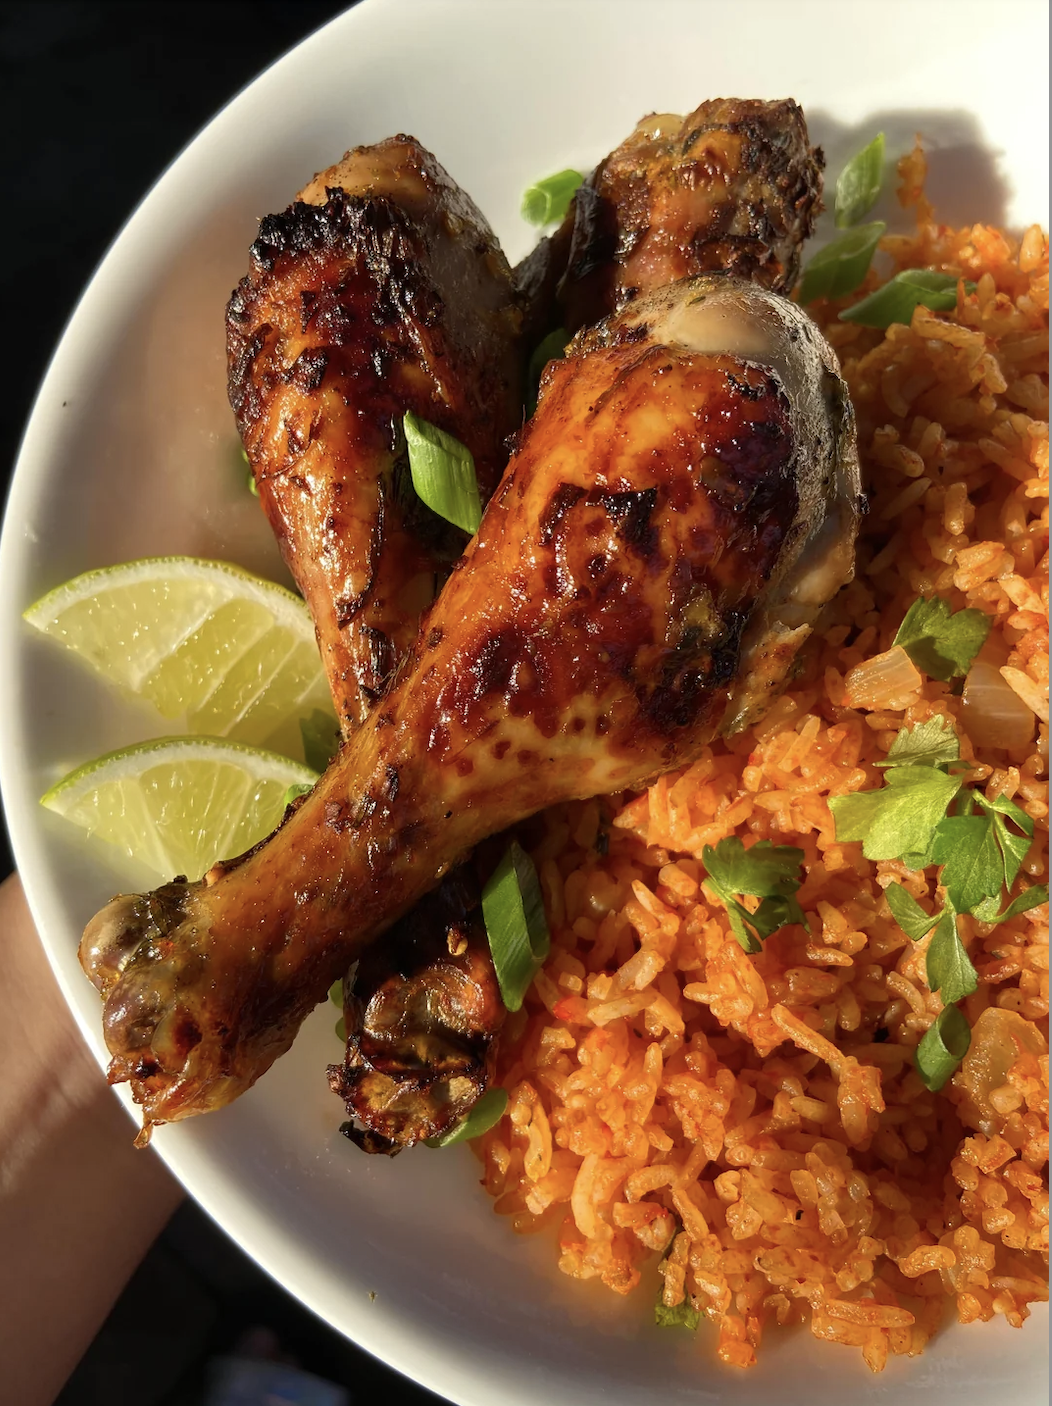 Grilled chicken drumsticks on a bed of seasoned rice with lime wedges and parsley garnish